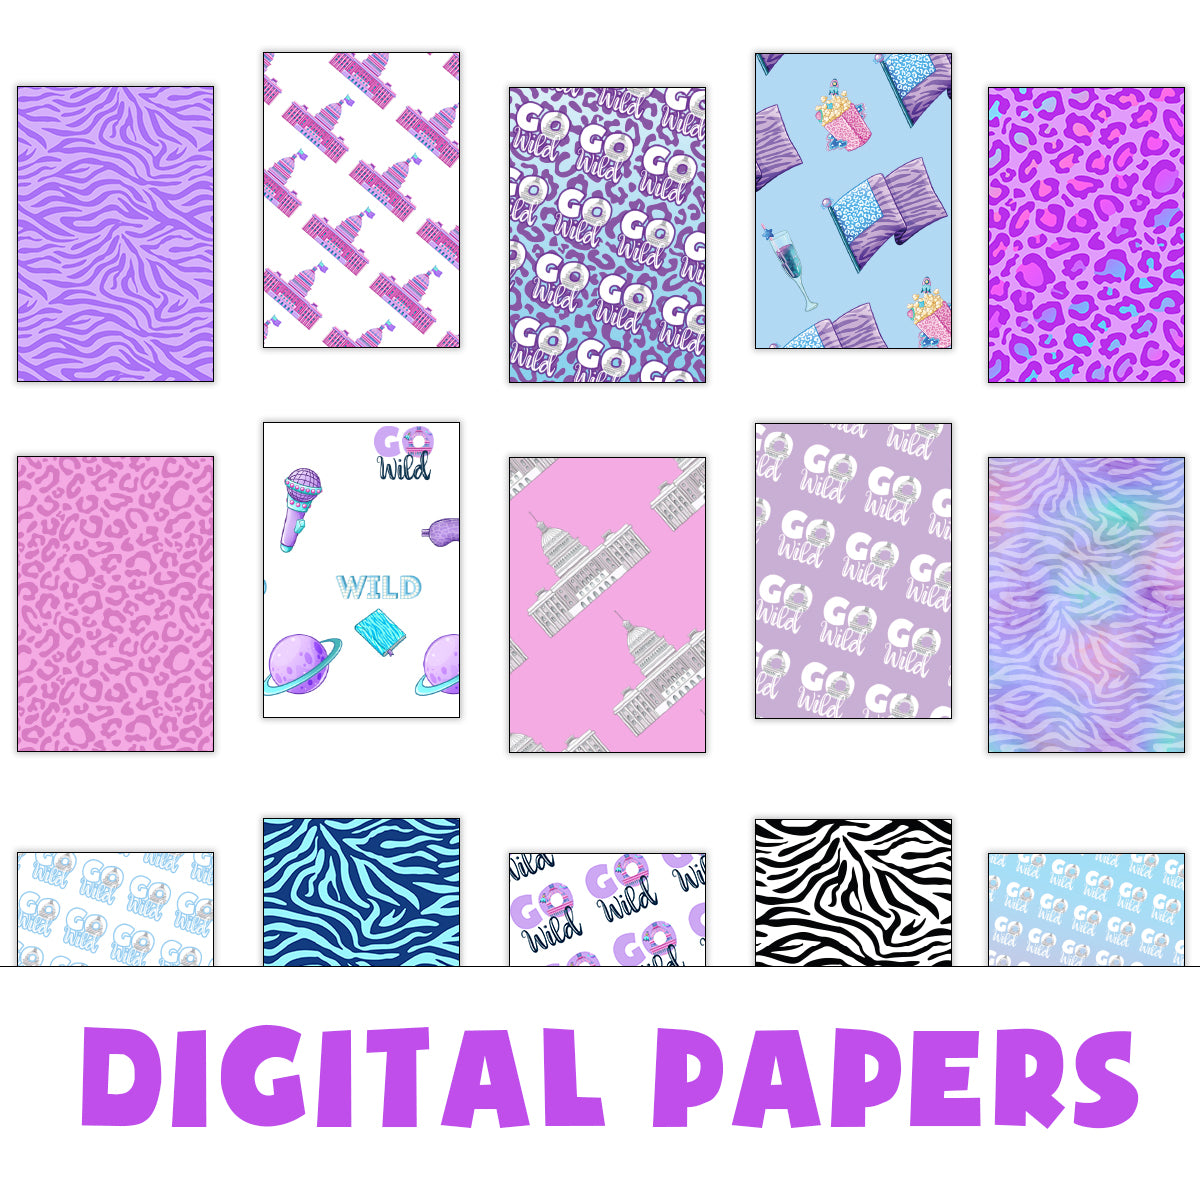 Digital Papers: Wild Stars Printable – A Little Spark